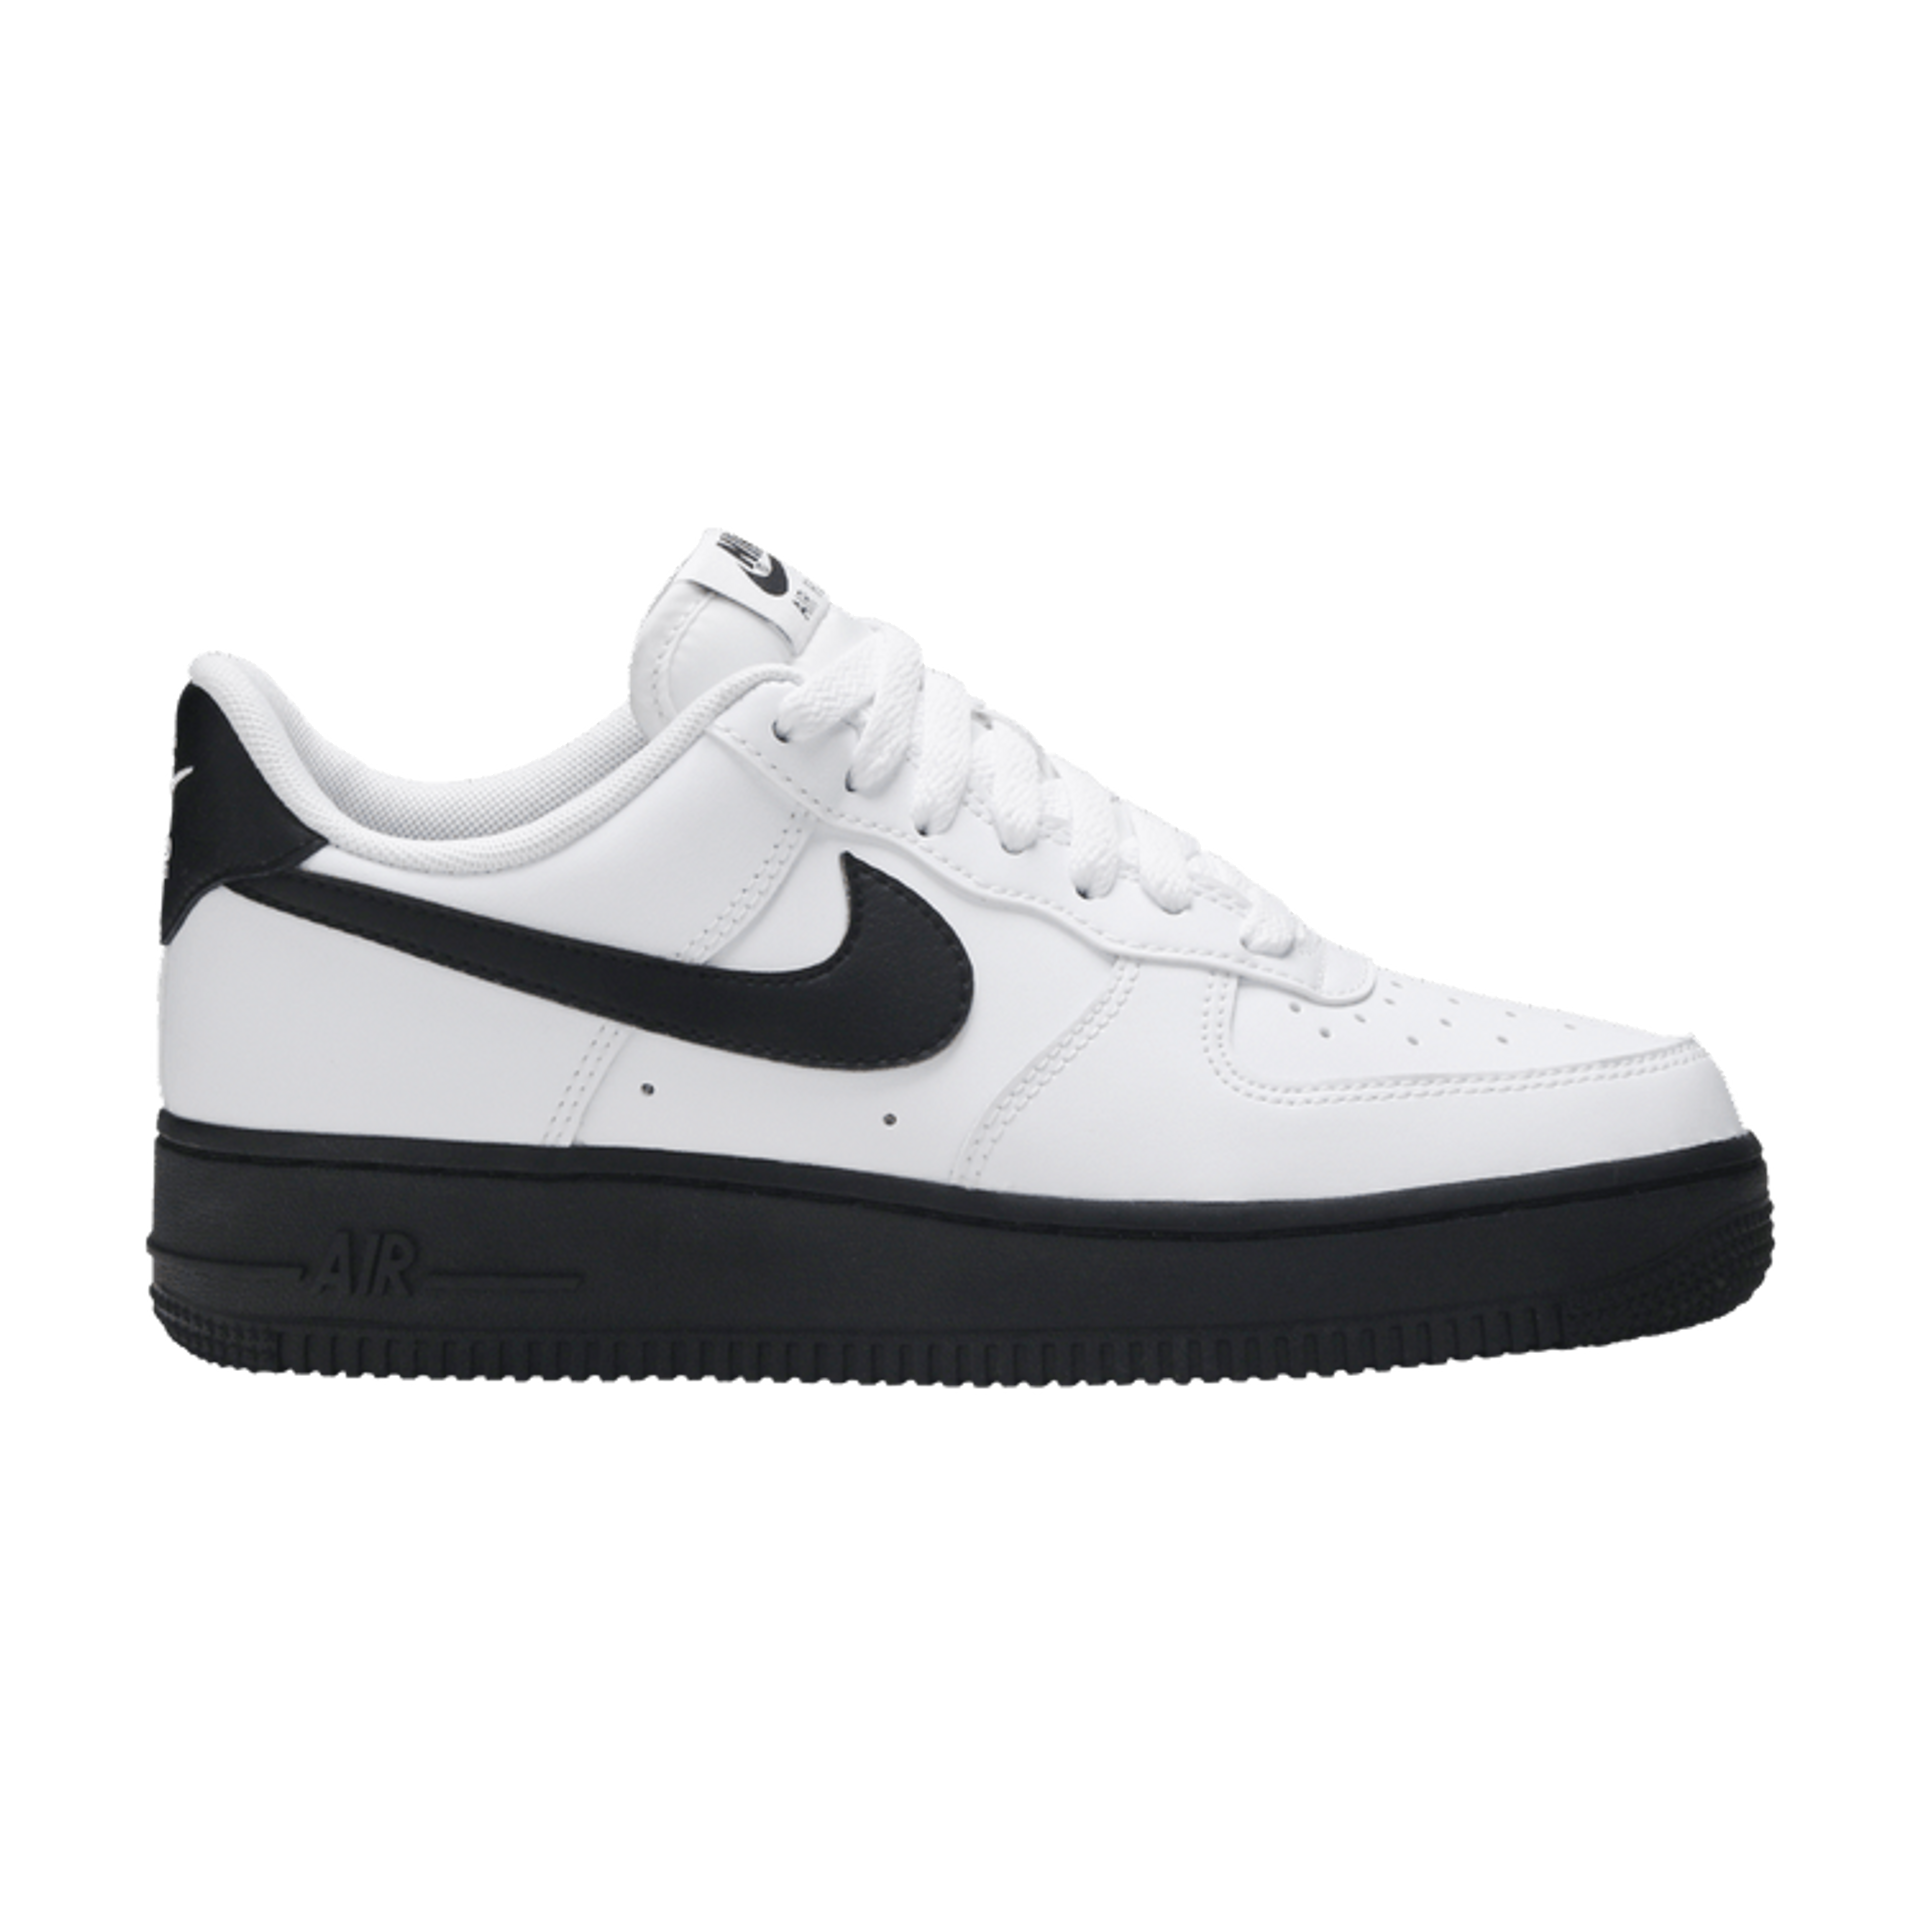 Air Force 1 Low 'White Black Sole' - CK7663 101 | Ox Street